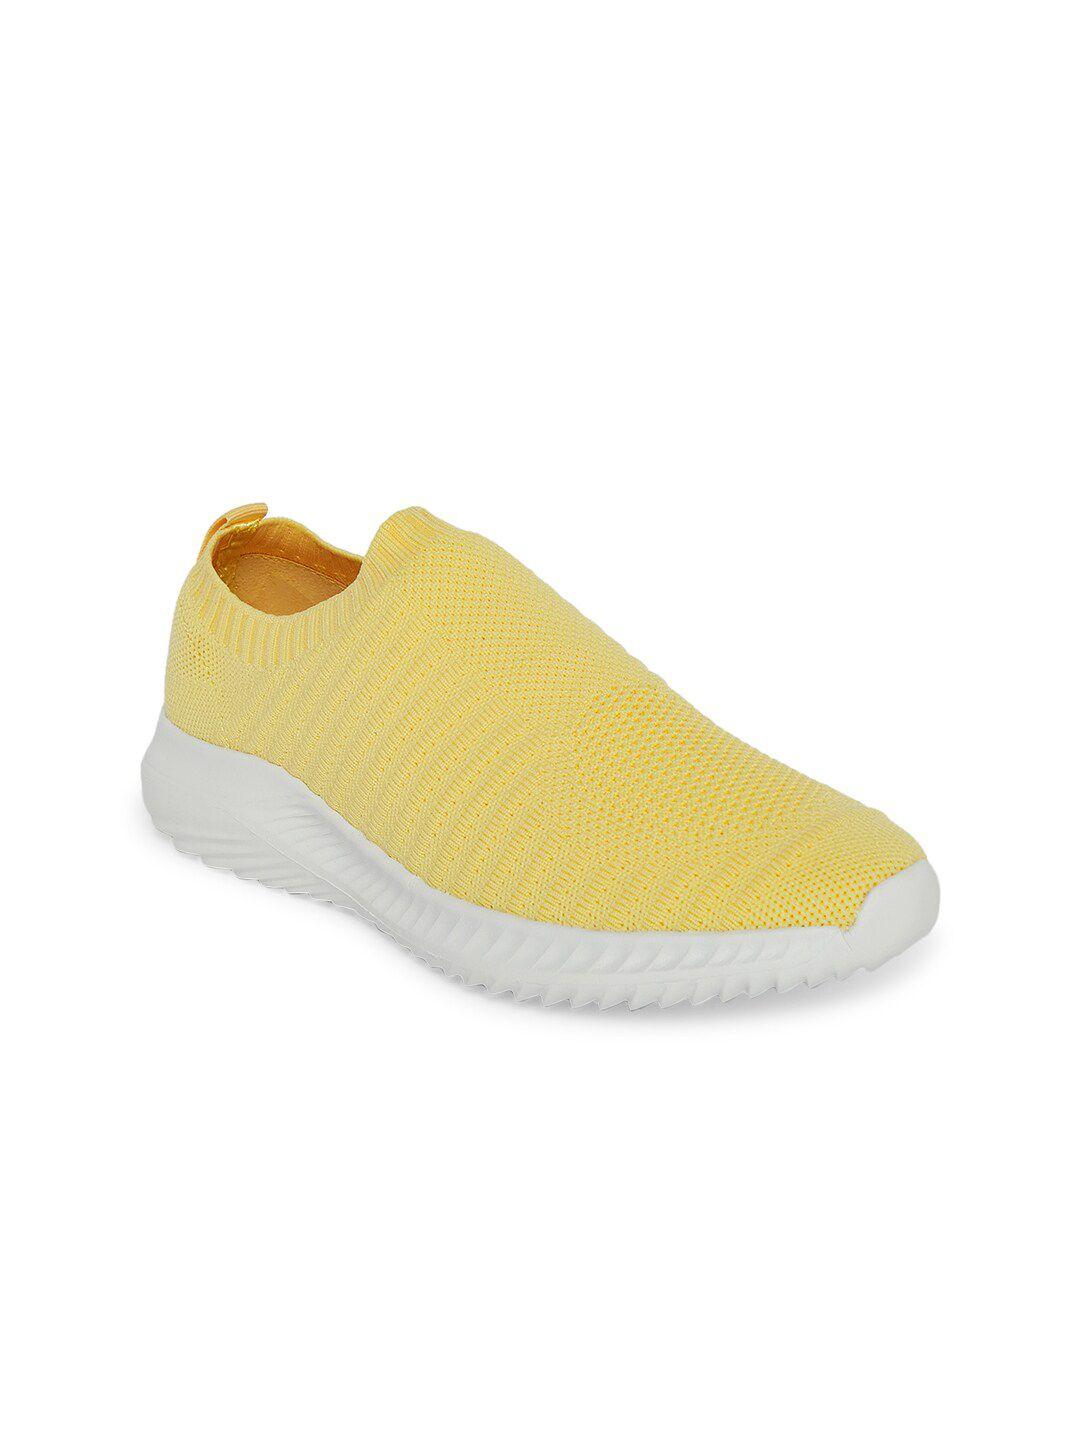 forever glam by pantaloons women yellow textile running non-marking shoes